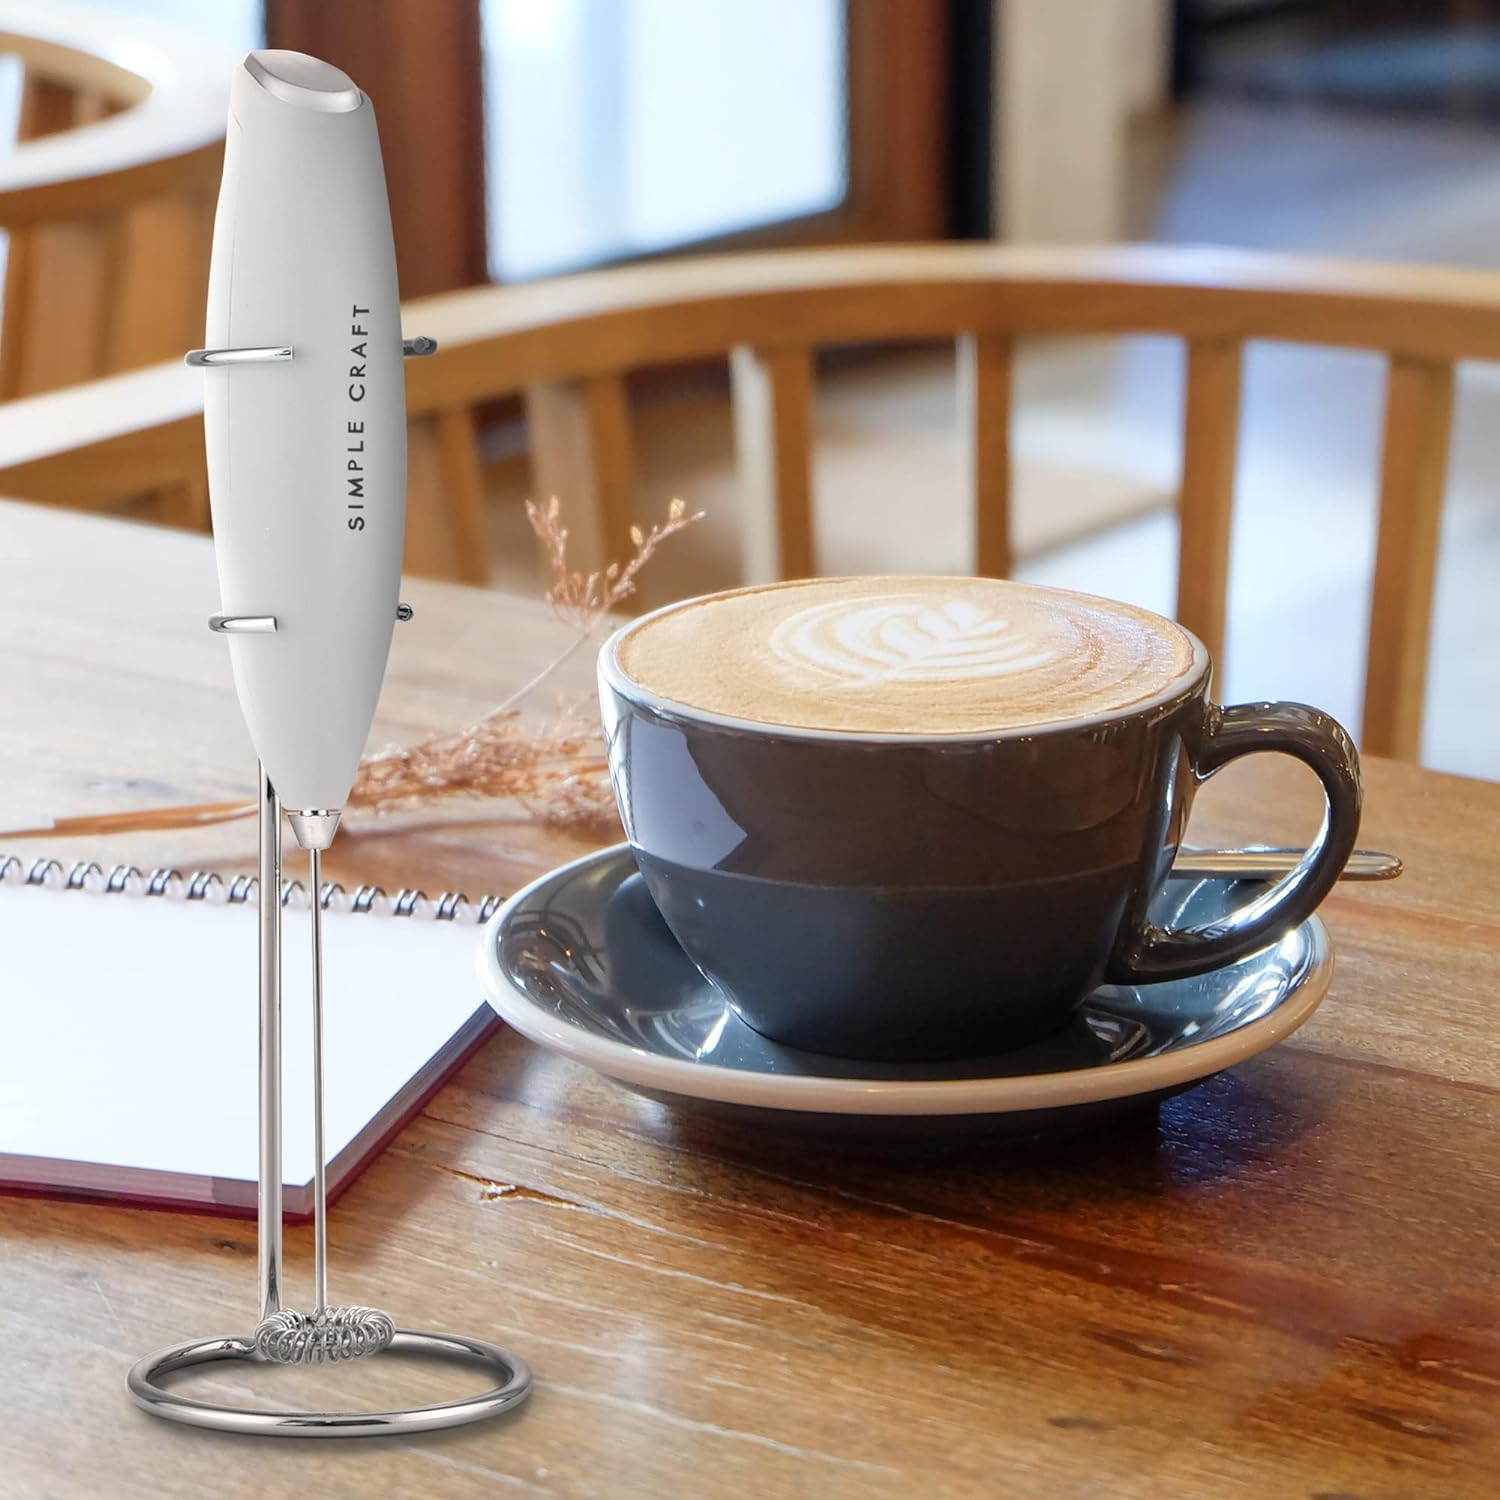 Zulay Kitchen Milk Frother Handheld Electric Whisk for Coffee Latte and  Matcha Black